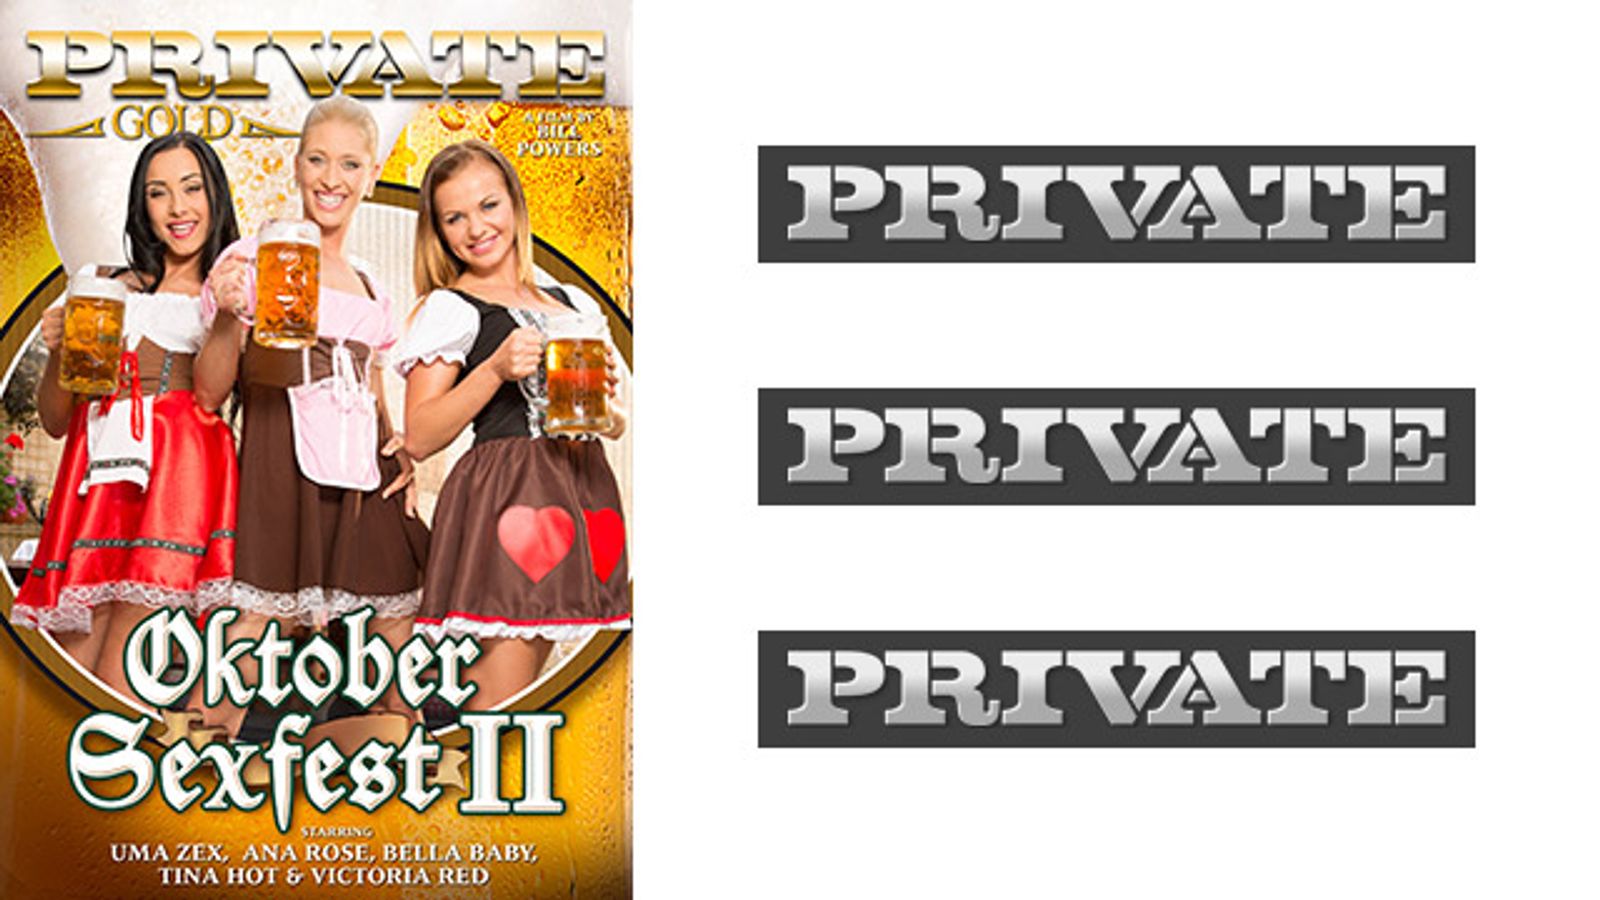 Private Releases 'Oktober SexFest II'